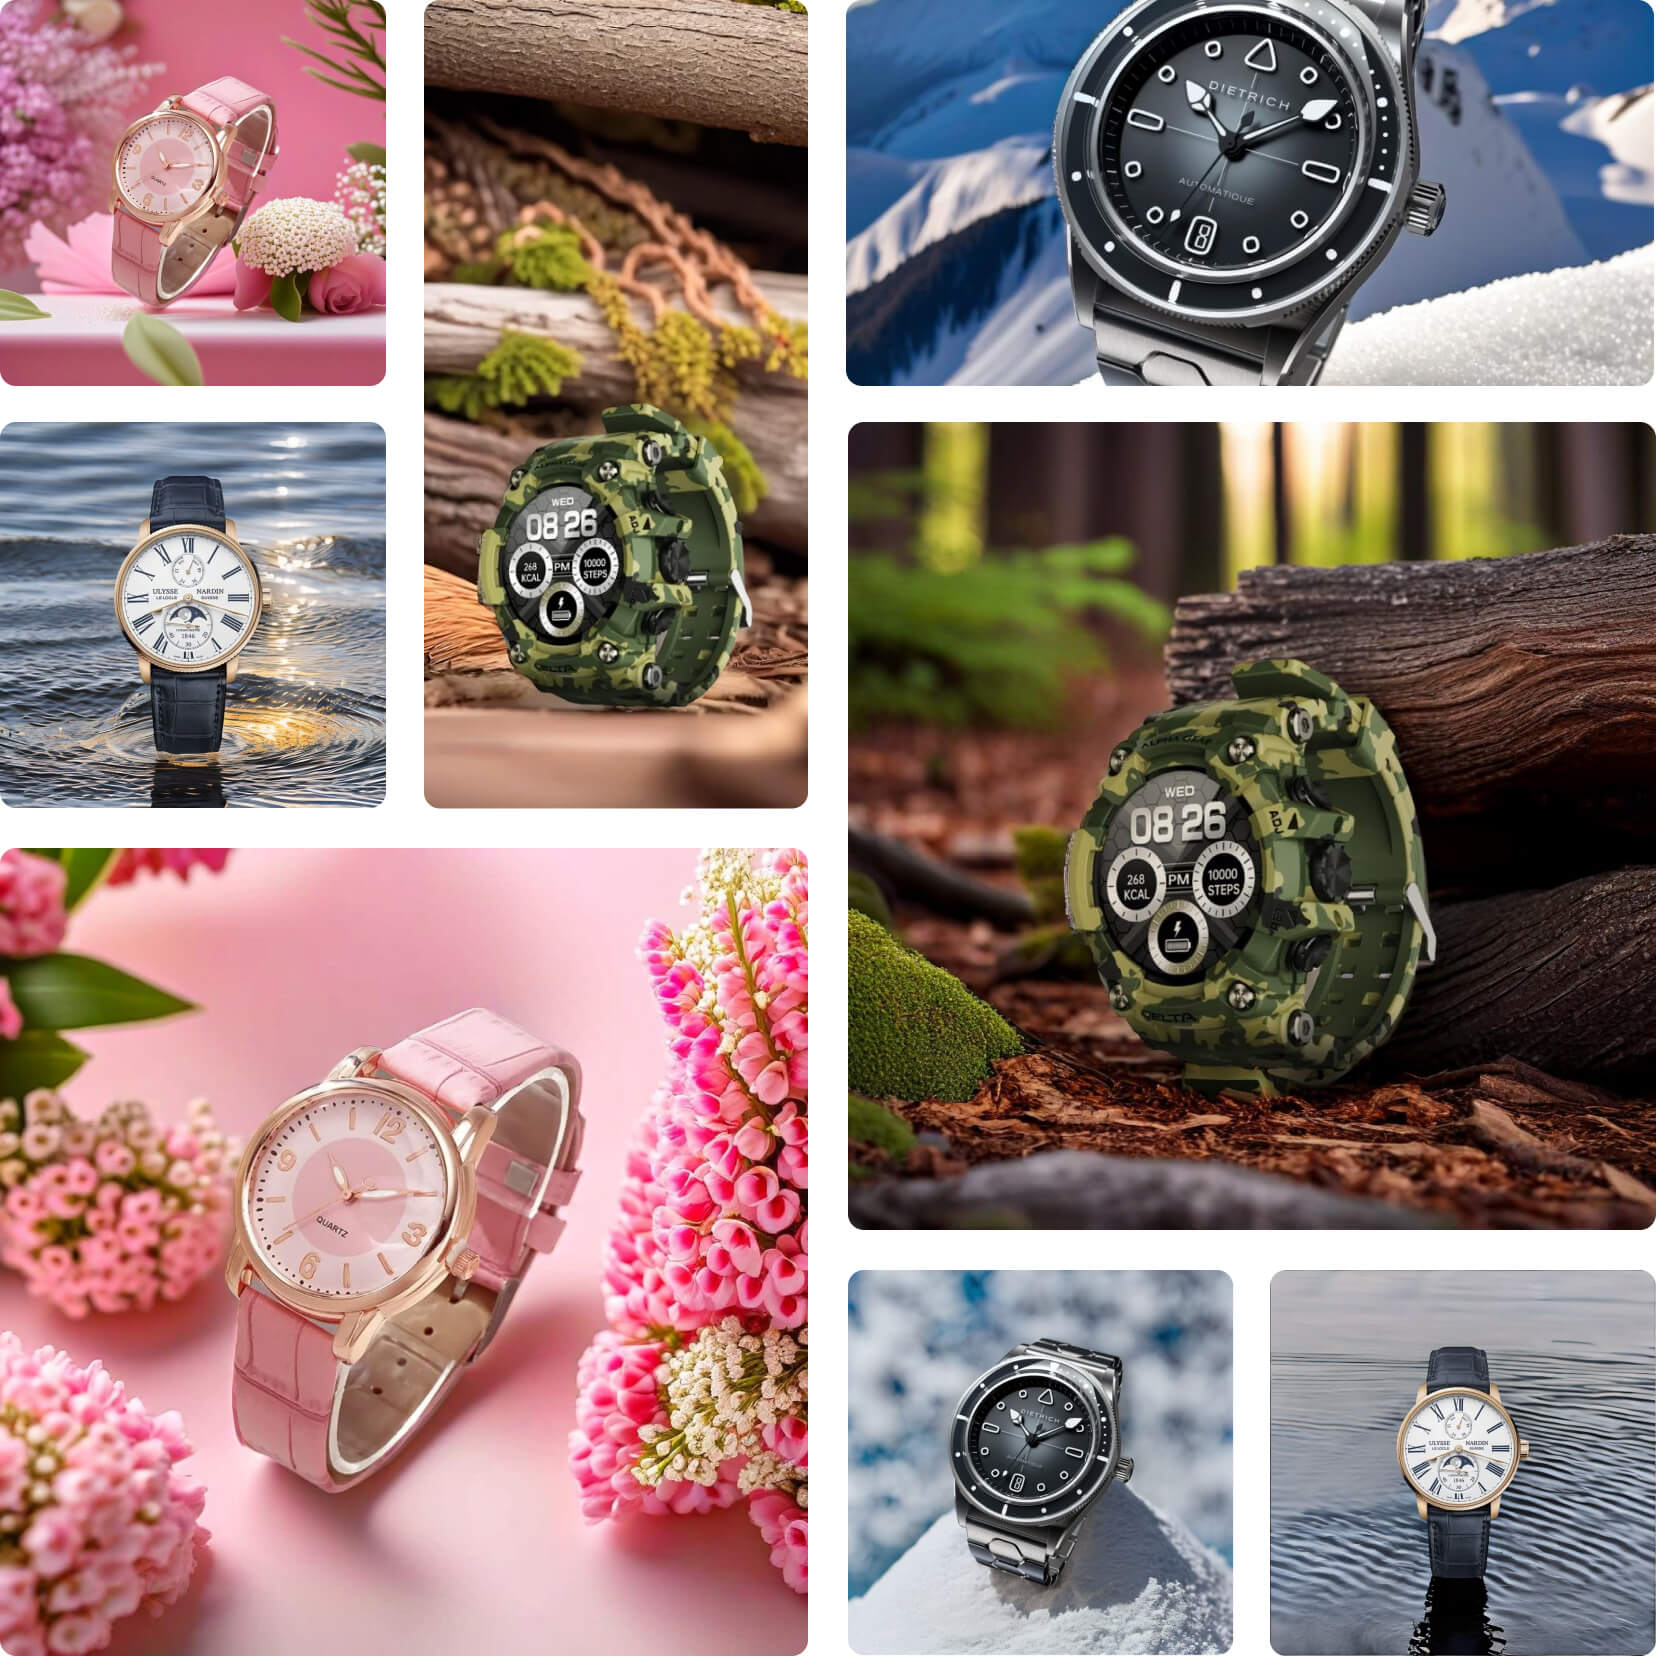 A collage of a watch on various backgrounds